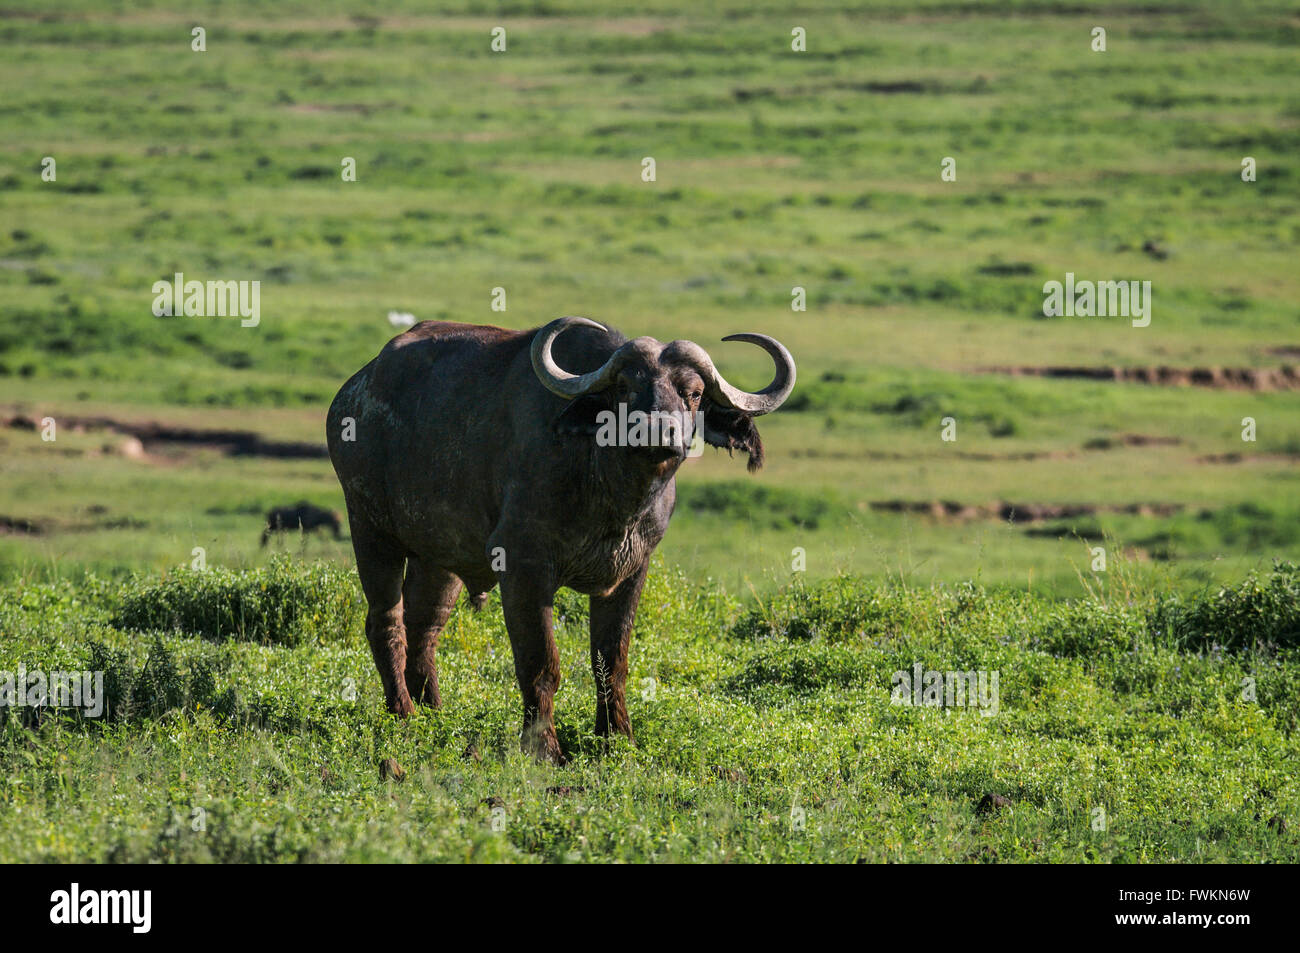 One African Buffalo (Syncerus caffer) standing in grassland in Ngorongoro Crater, Tanzania, Africa Stock Photo